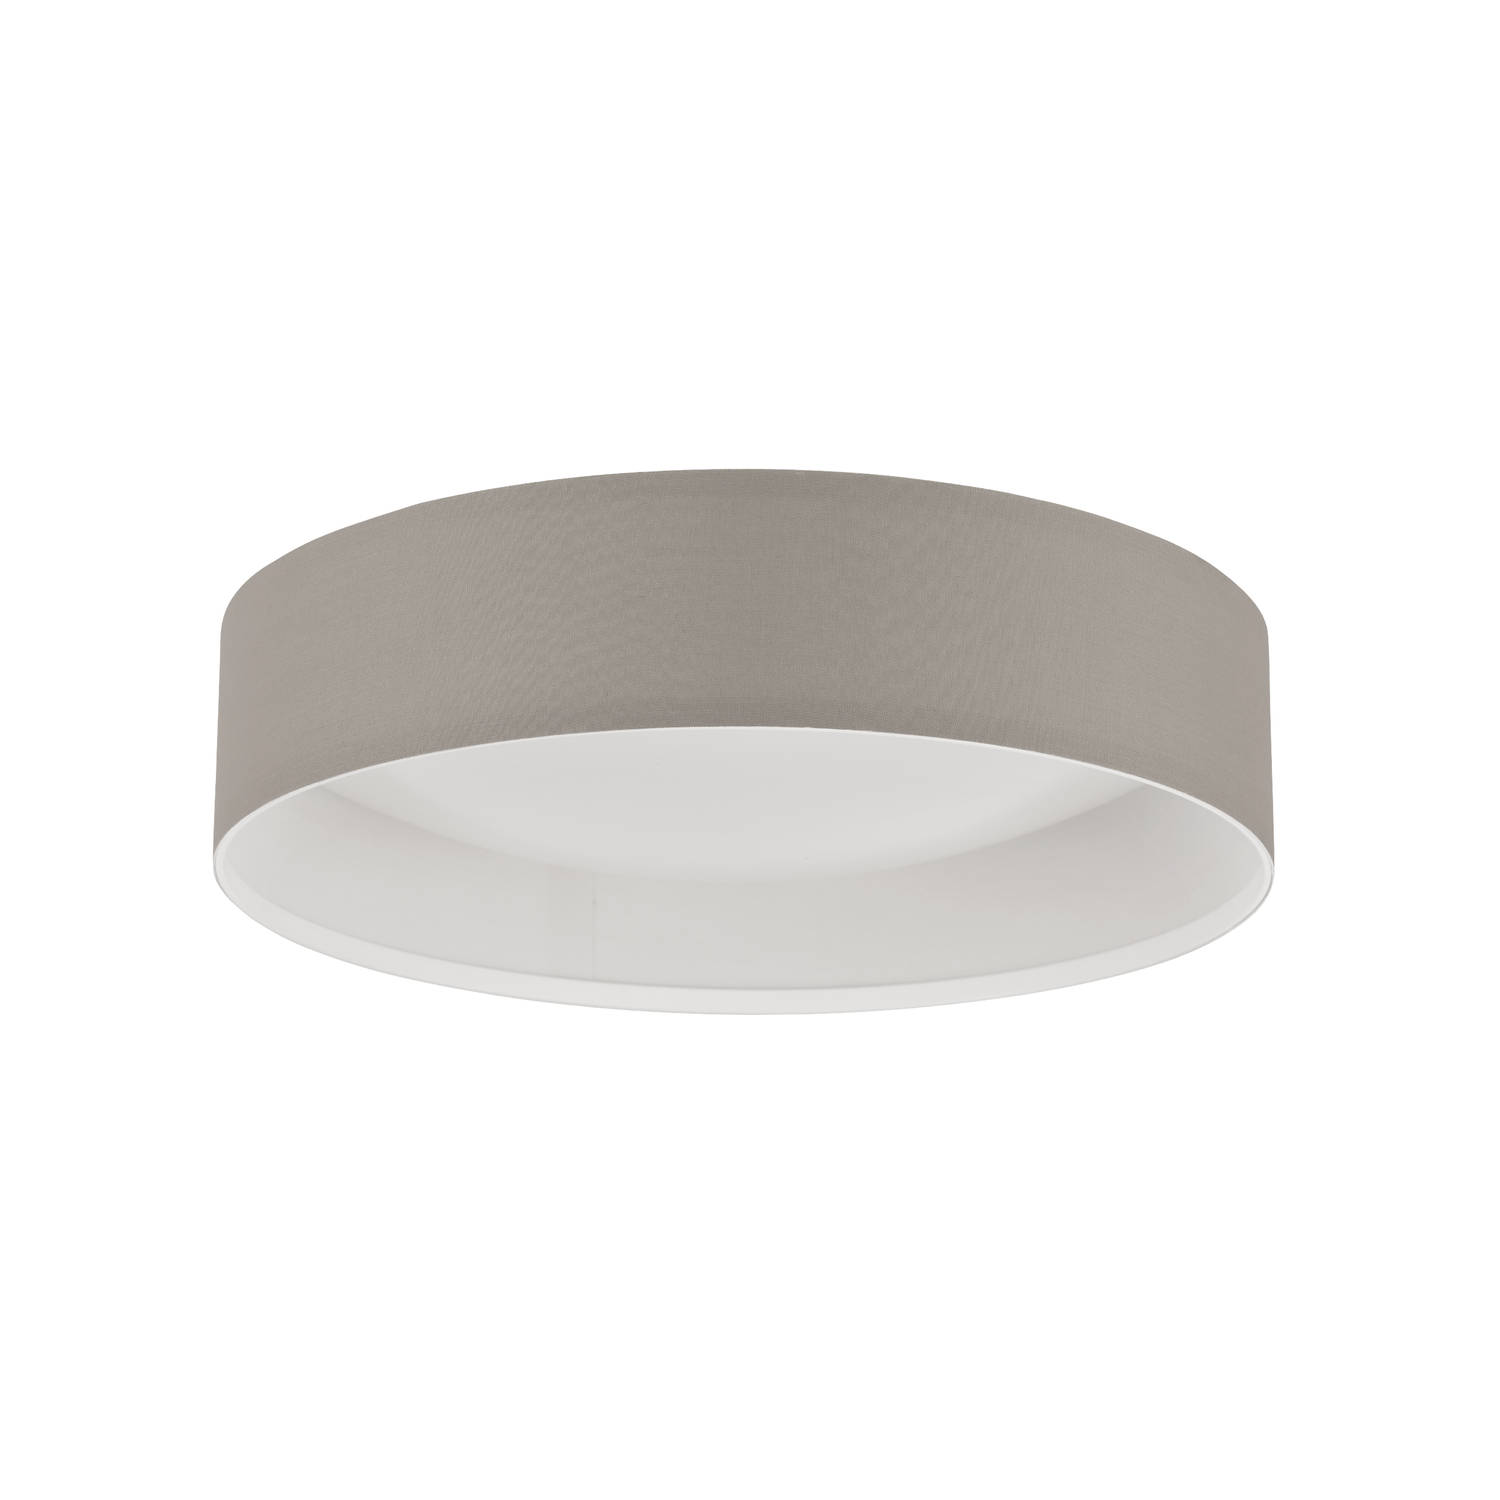 31589 Ceiling--wall luminaire 31589